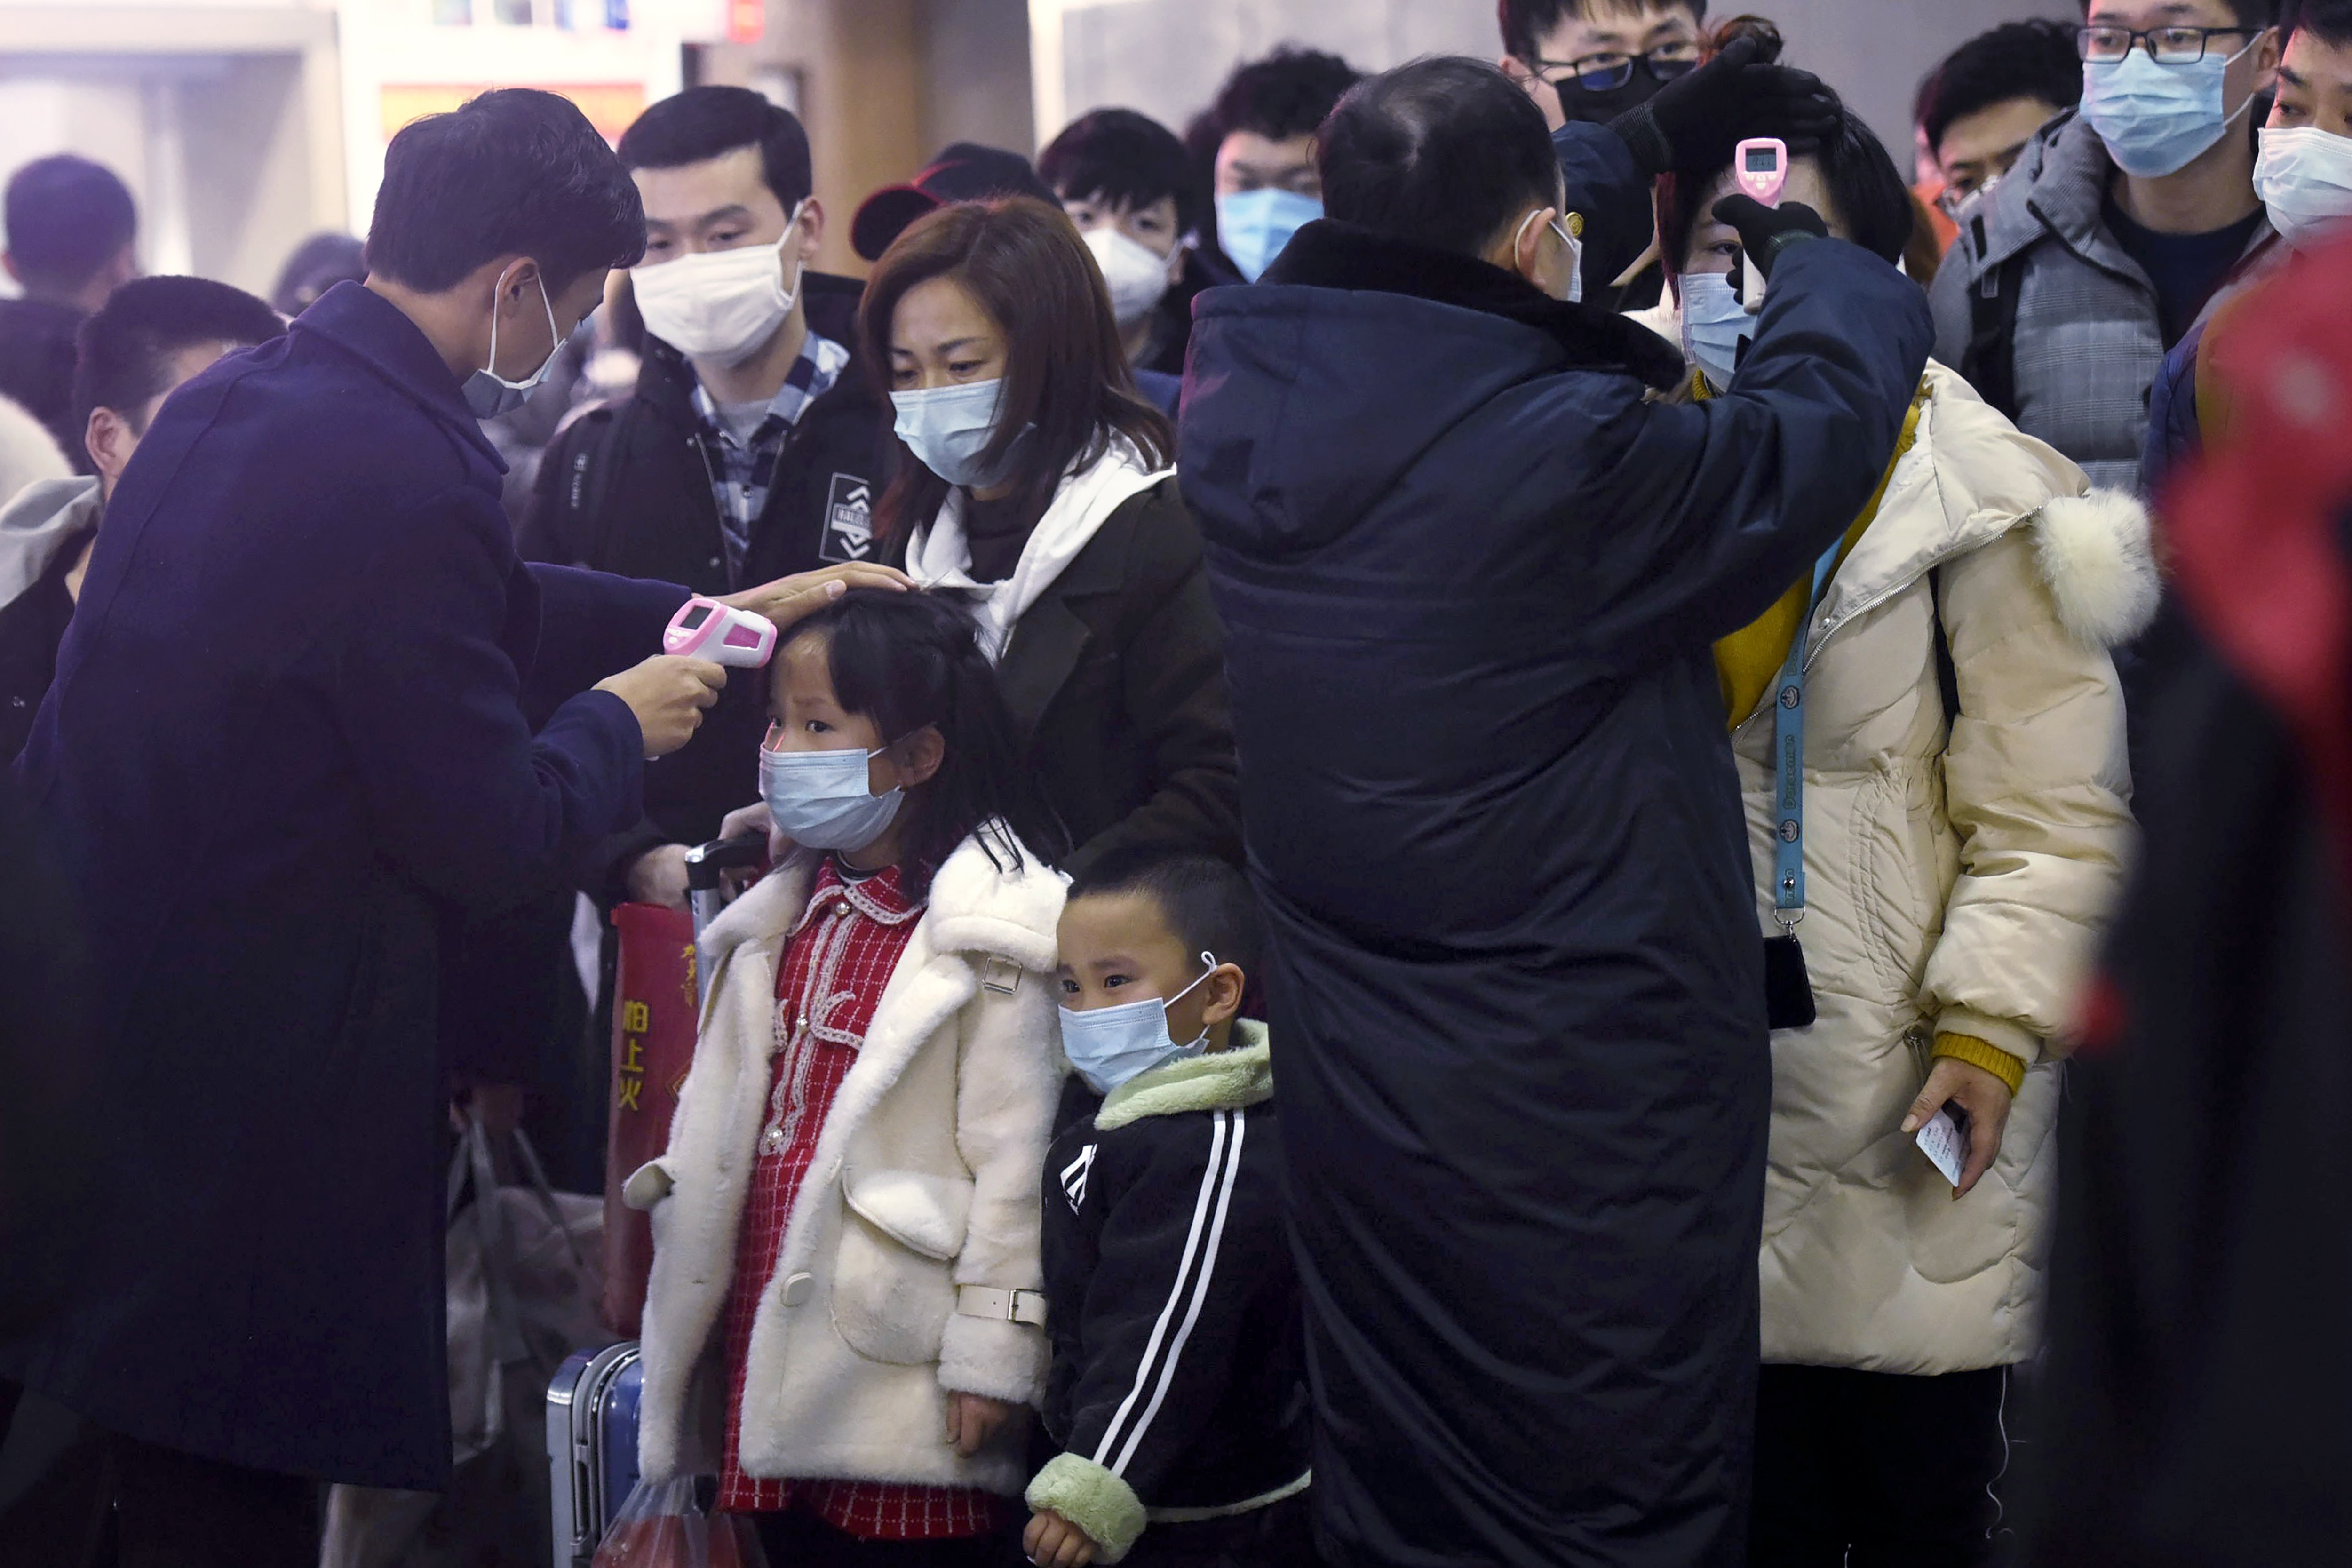 Workers use infrared thermometers to check the temperature of passengers arriving from Wuhan at a train station in Hangzhou in eastern China's Zhejiang Province, Thursday, Jan. 23, 2020. Photo: Chinatopix via AP